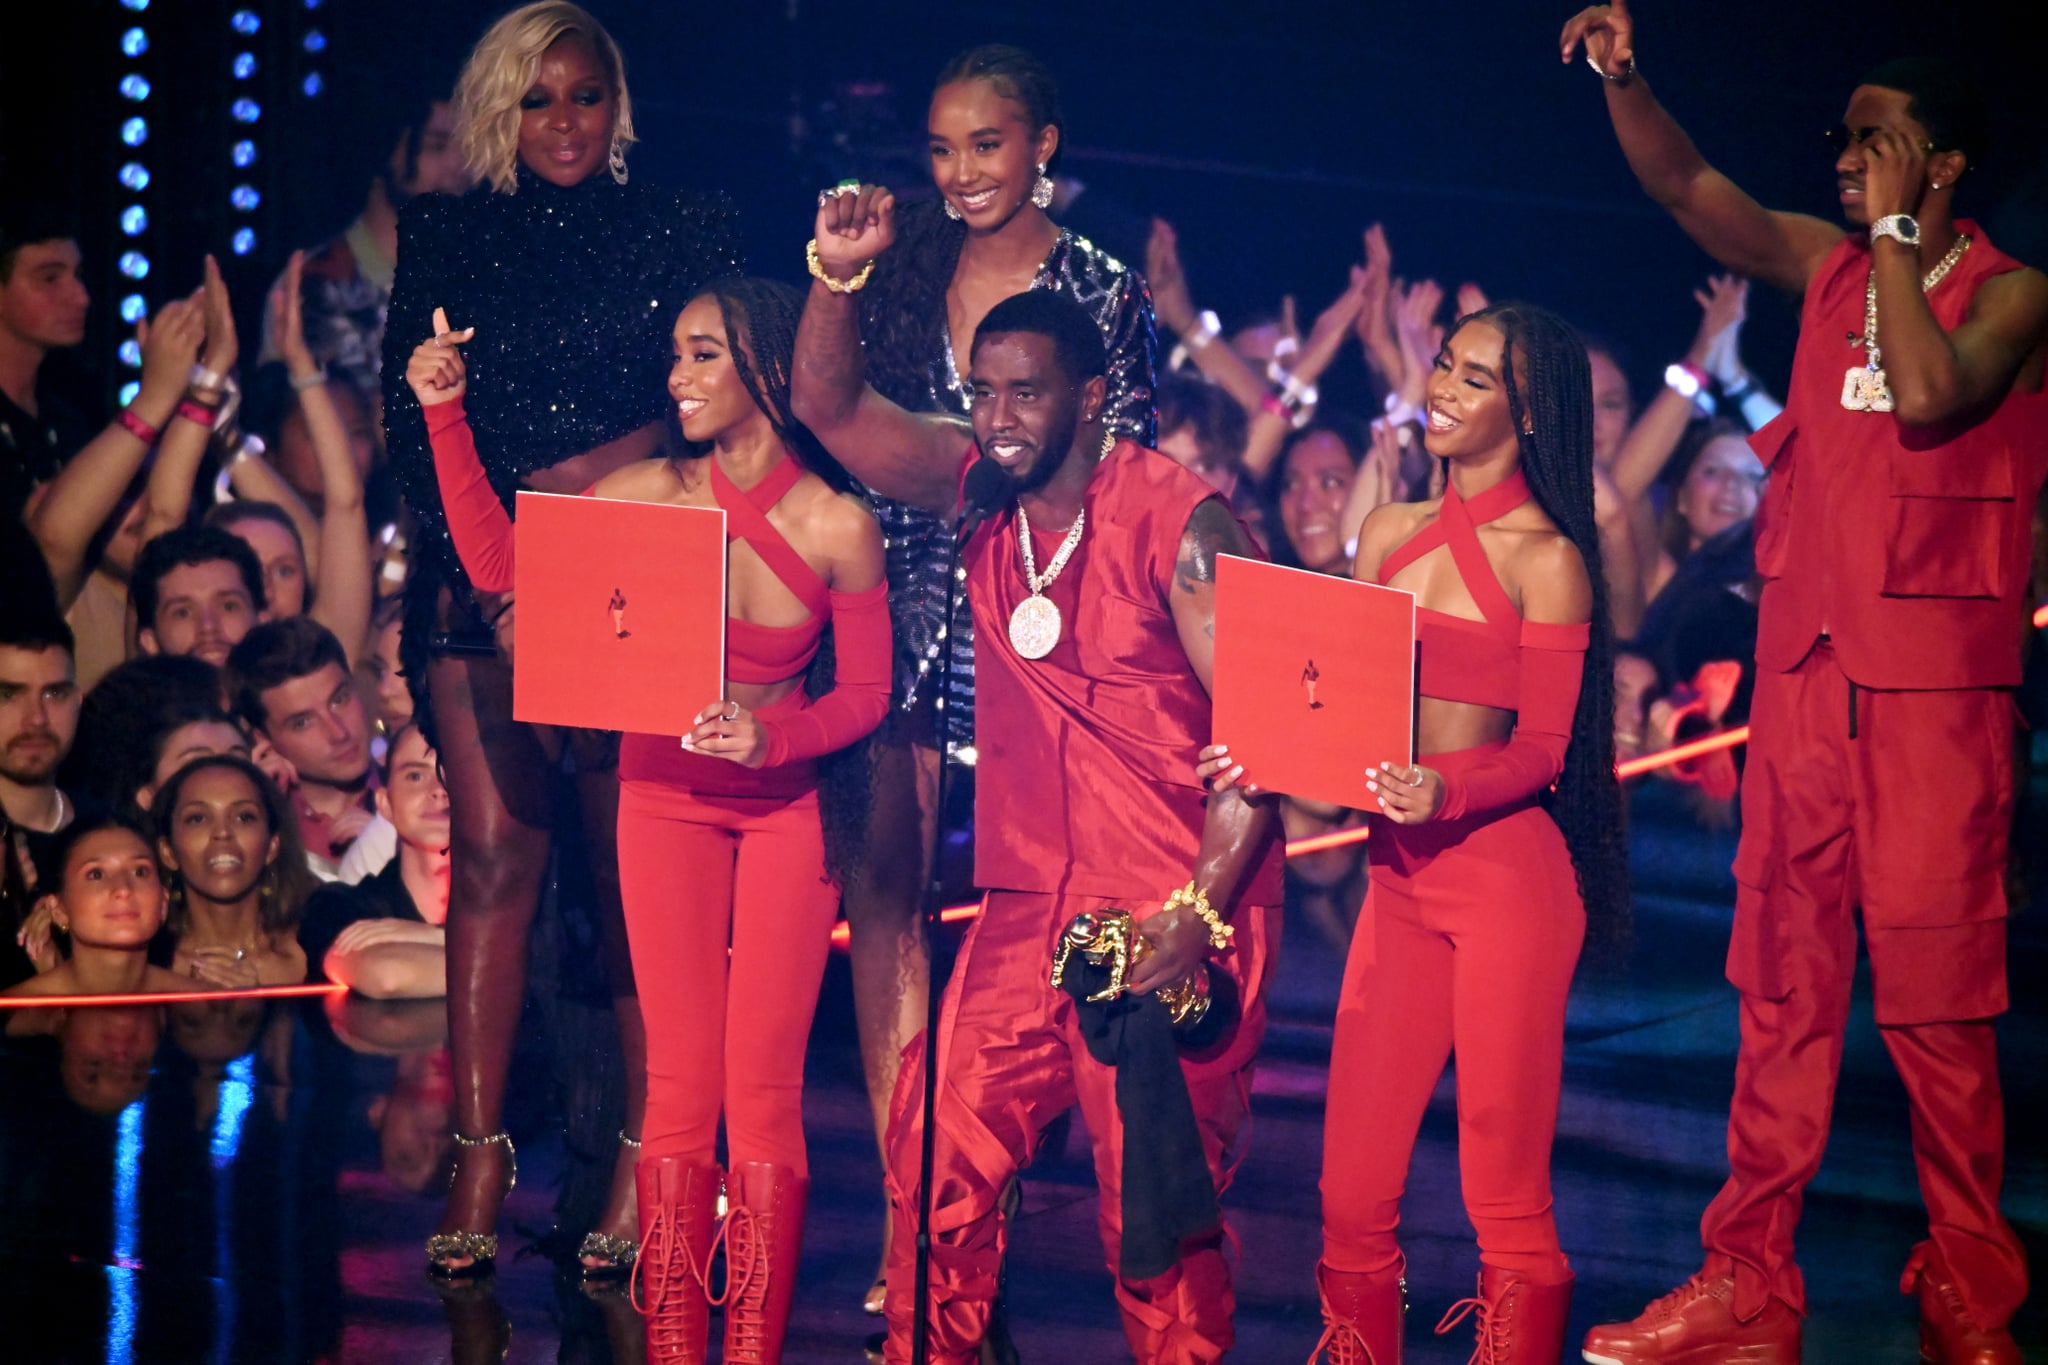 NEWARK, NEW JERSEY - SEPTEMBER 12: Diddy accepts the Global Icon Award onstage during the 2023 MTV Video Music Awards at Prudential Centre on September 12, 2023 in Newark, New Jersey. (Photo by Noam Galai/Getty Images for MTV)